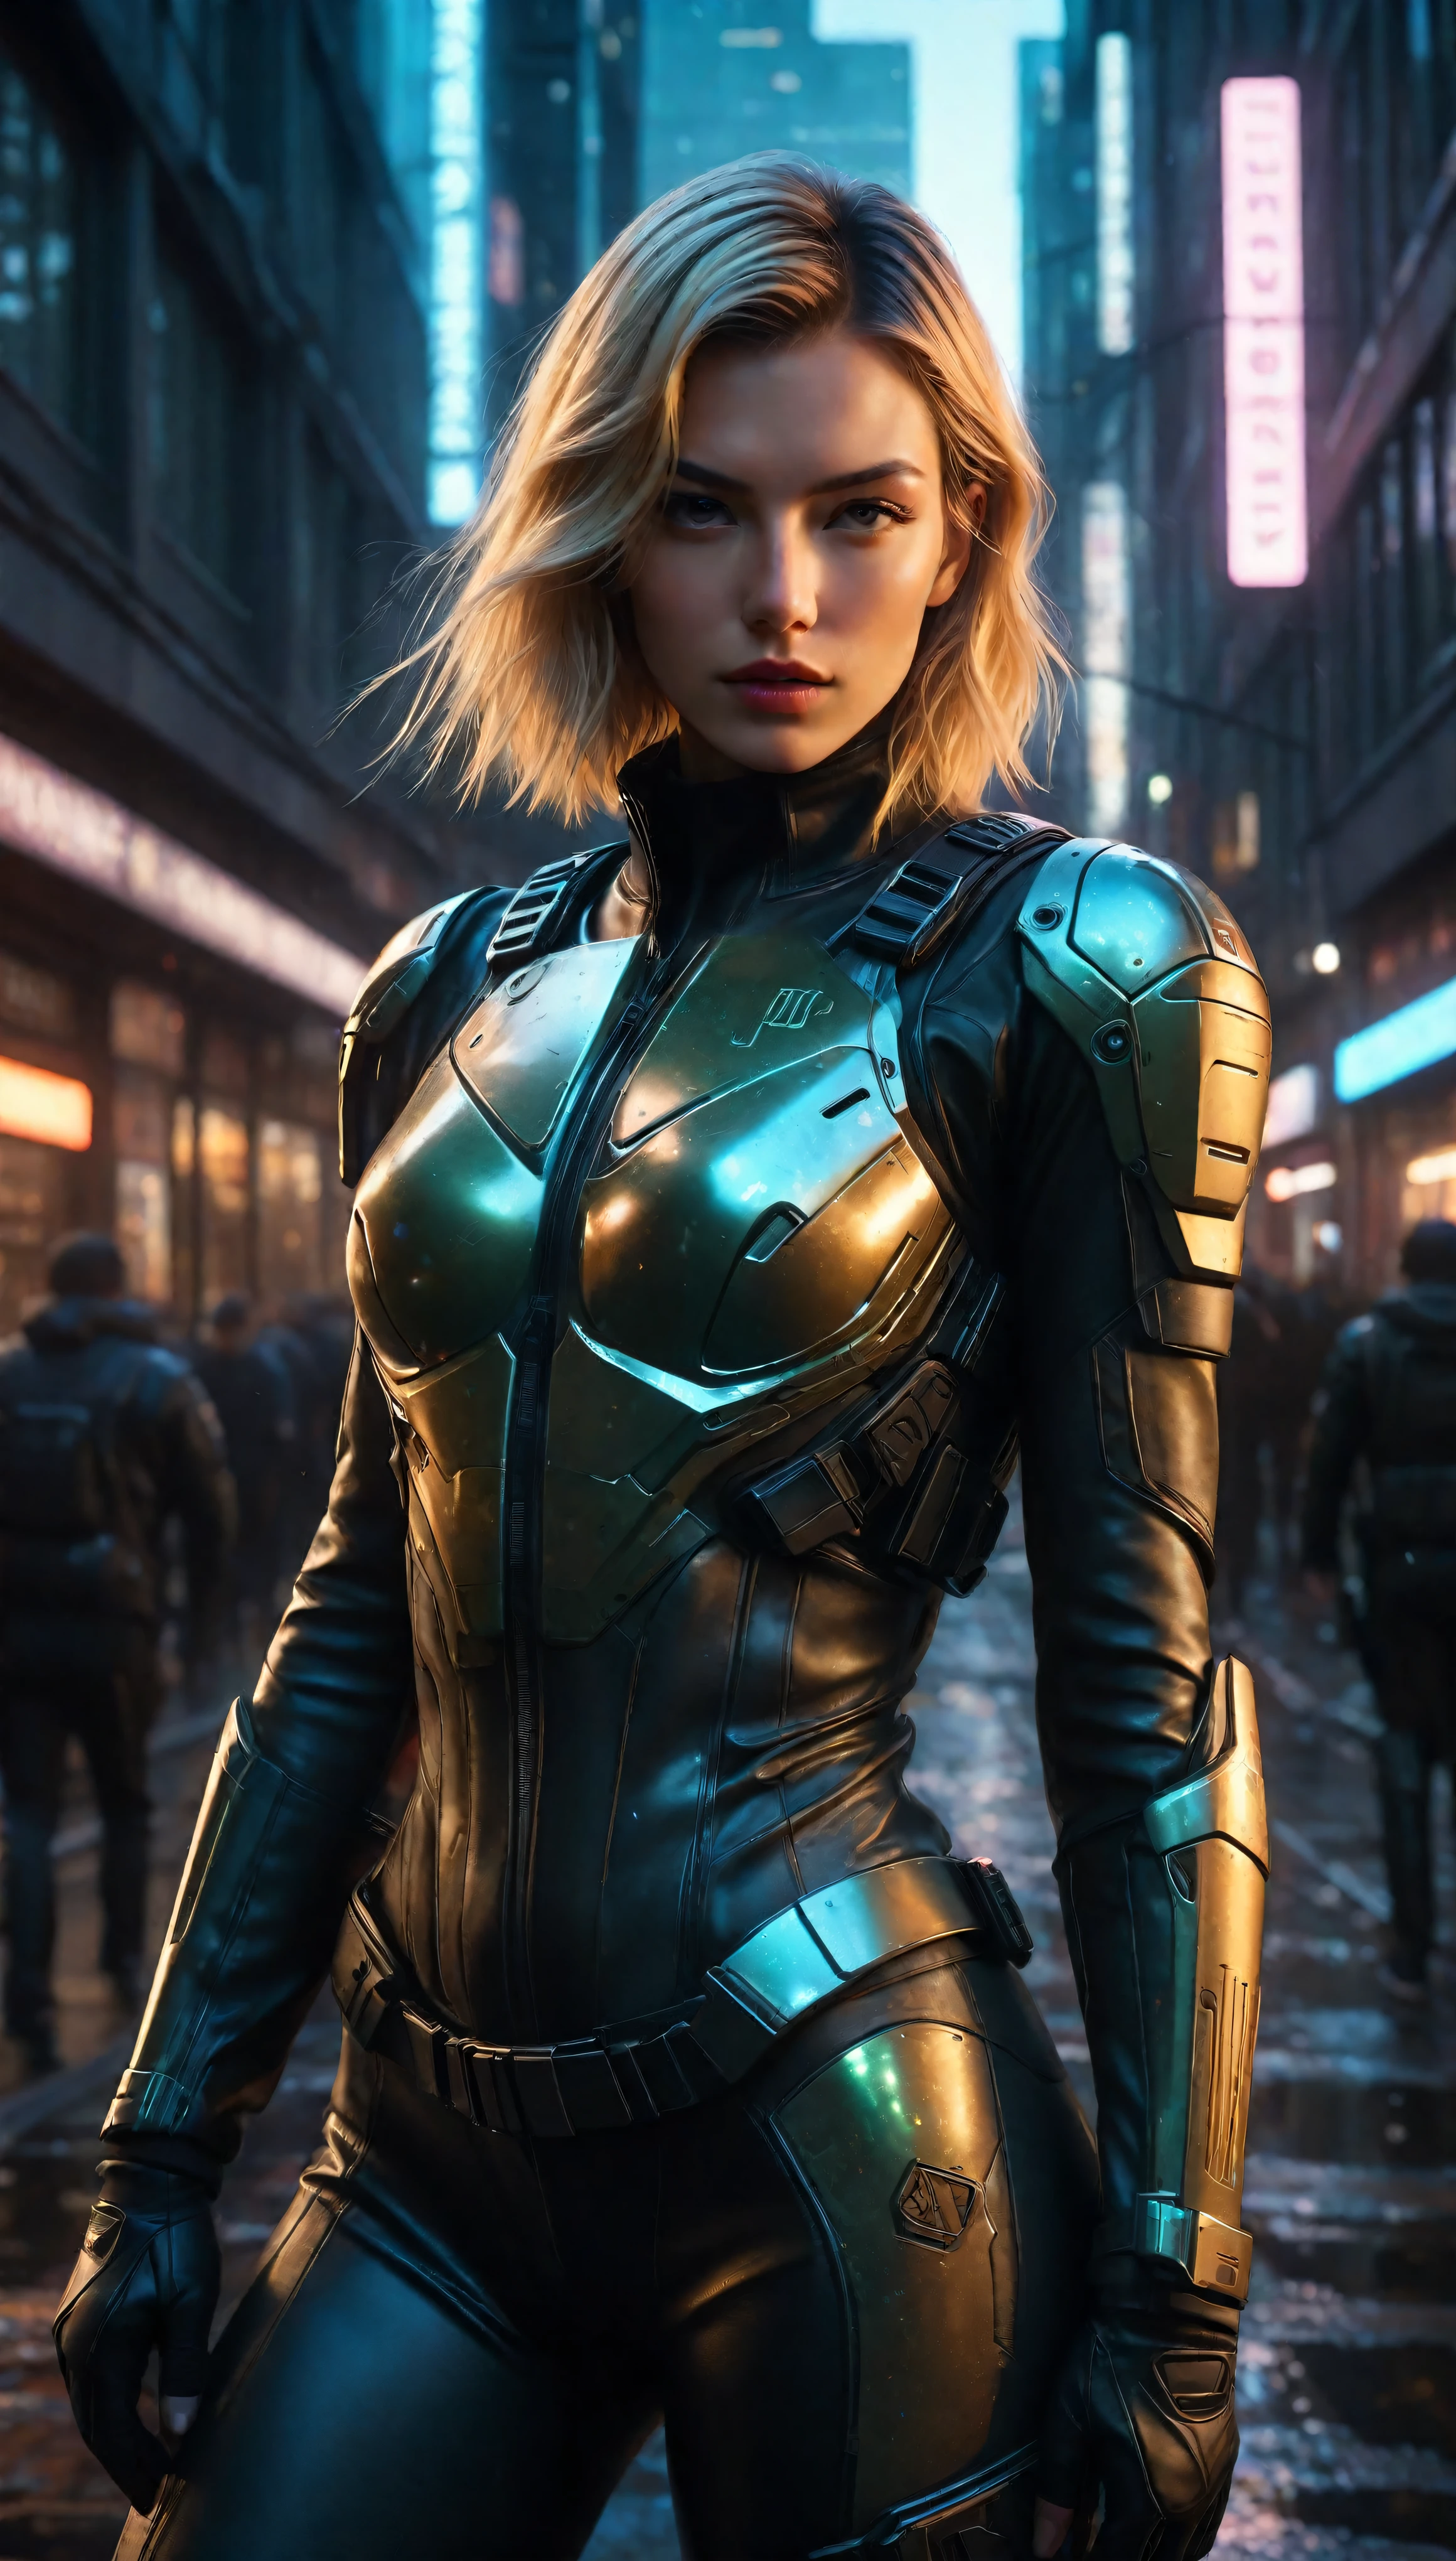 ((Masterpiece in maximum 16K resolution):1.6),((soft_color_photograpy:)1.5), ((Ultra-Detailed):1.4),((Movie-like still images and dynamic angles):1.3). | (cinematic photo of Blonde Supermodel beauty wearing a high tech tight combatsuit in a cyberpunk city), (Supermodel beauty), (Blonde), (wearing a high tech combat suit), (focus on the high tech combat suit), (cinematic lens), (cyberpunk pistol), (autumn light), (tyndall effect), (Science fiction atmosphere), (shimmer), (light reflections), (visual experience),(Realism), (Realistic),award-winning graphics, dark shot, film grain, extremely detailed, Digital Art, rtx, Unreal Engine, scene concept anti glare effect, All captured with sharp focus. | Rendered in ultra-high definition with UHD and retina quality, this masterpiece ensures anatomical correctness and textured skin with super detail. With a focus on high quality and accuracy, this award-winning portrayal captures every nuance in stunning 16k resolution, immersing viewers in its lifelike depiction. | ((perfect_composition, perfect_design, perfect_layout, perfect_detail, ultra_detailed)), ((enhance_all, fix_everything)), More Detail, Enhance.